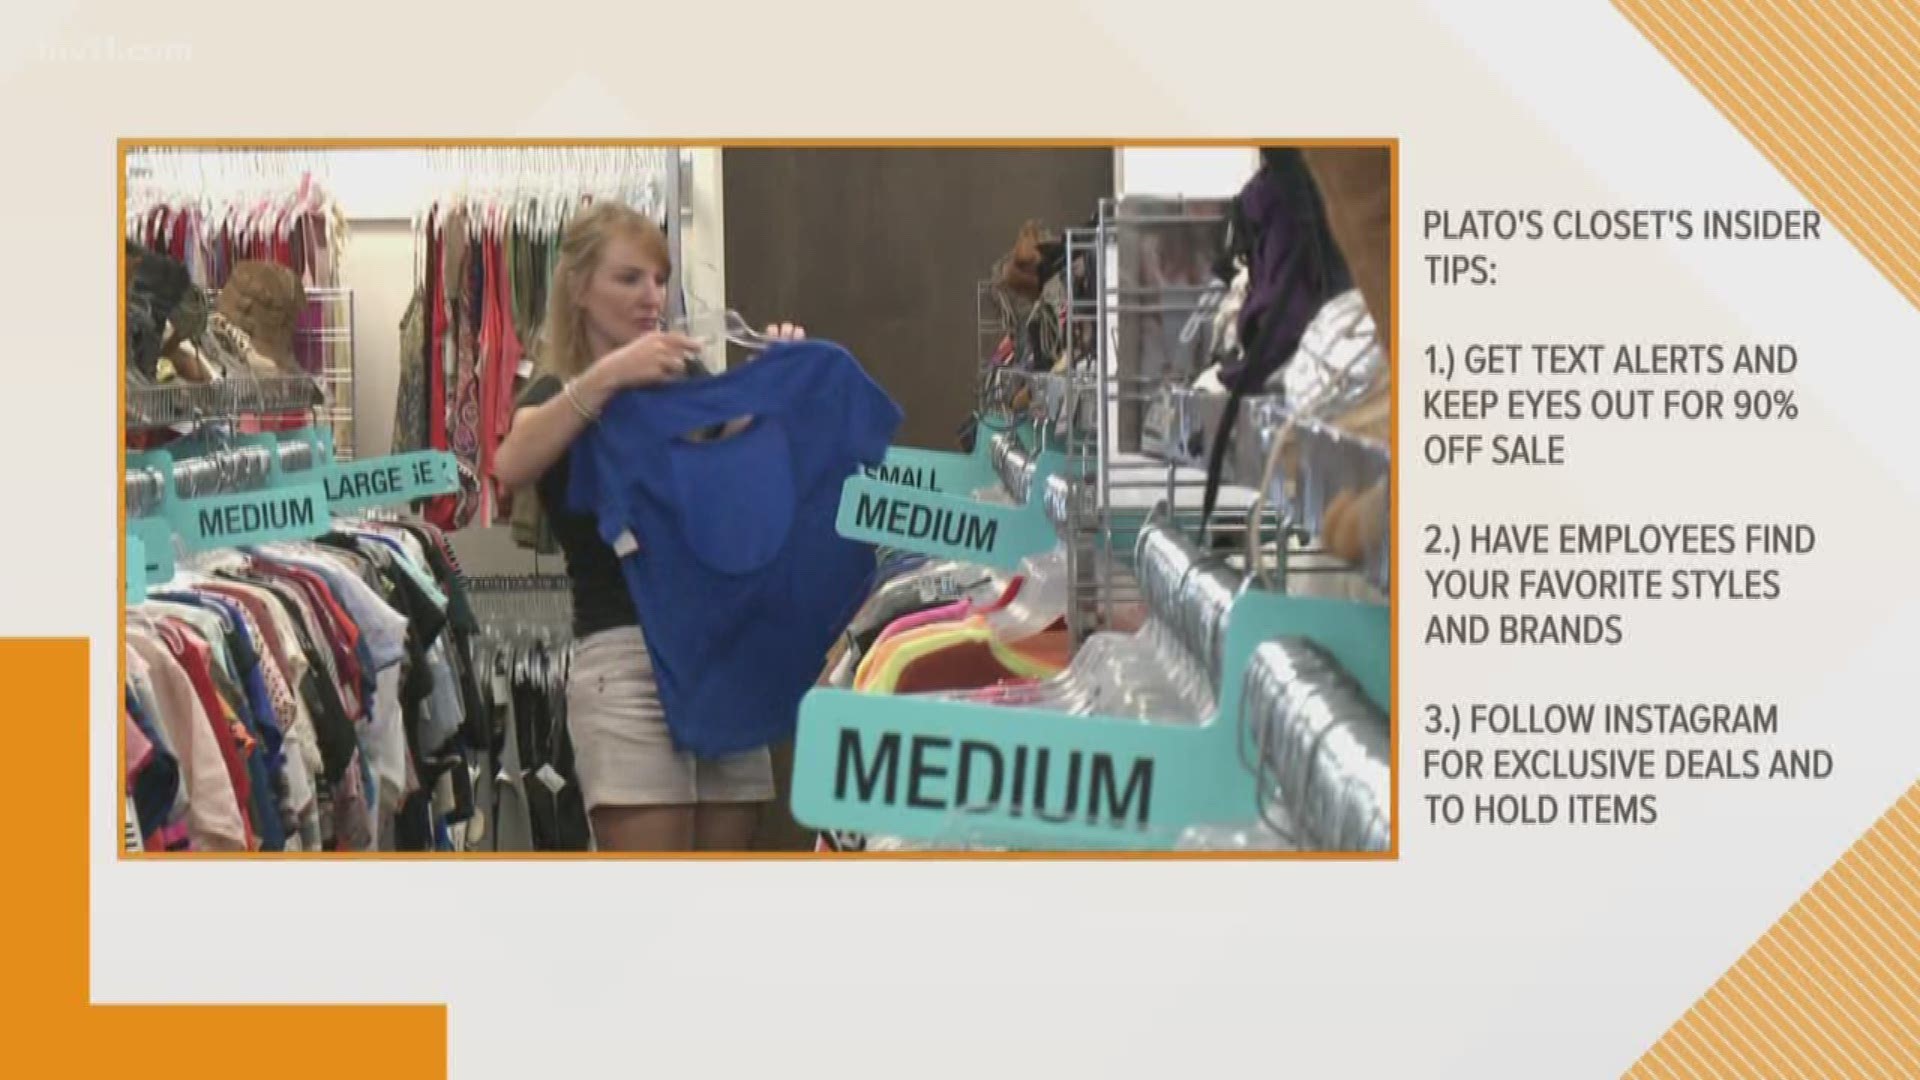 Amanda Jaeger brought back some great tips to thrifting success.